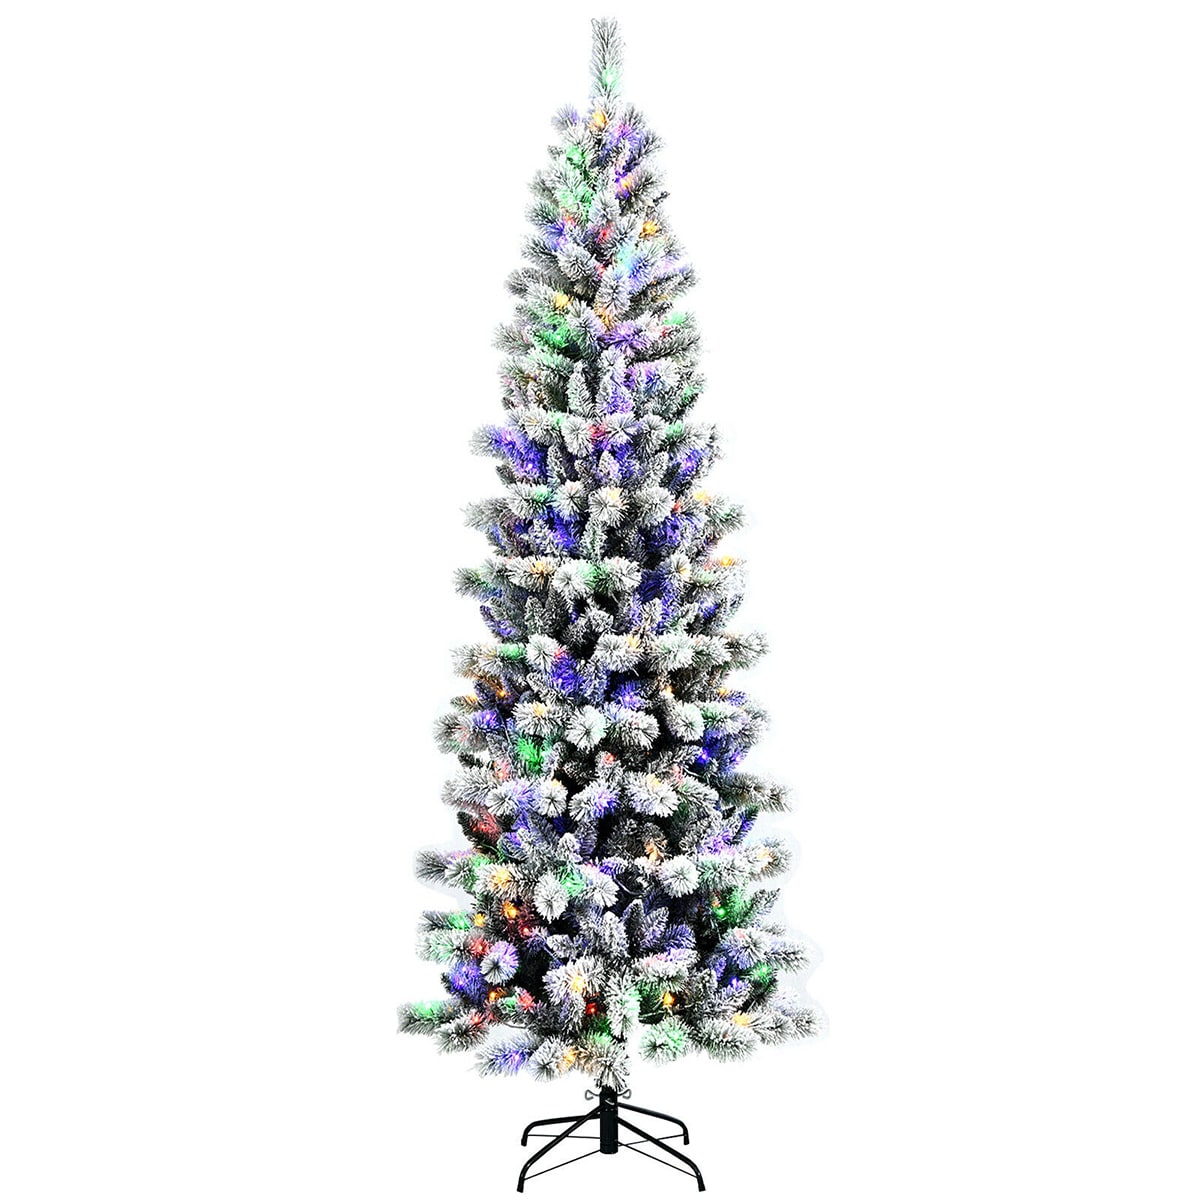 Remote Control Tree Christmas Decorations at